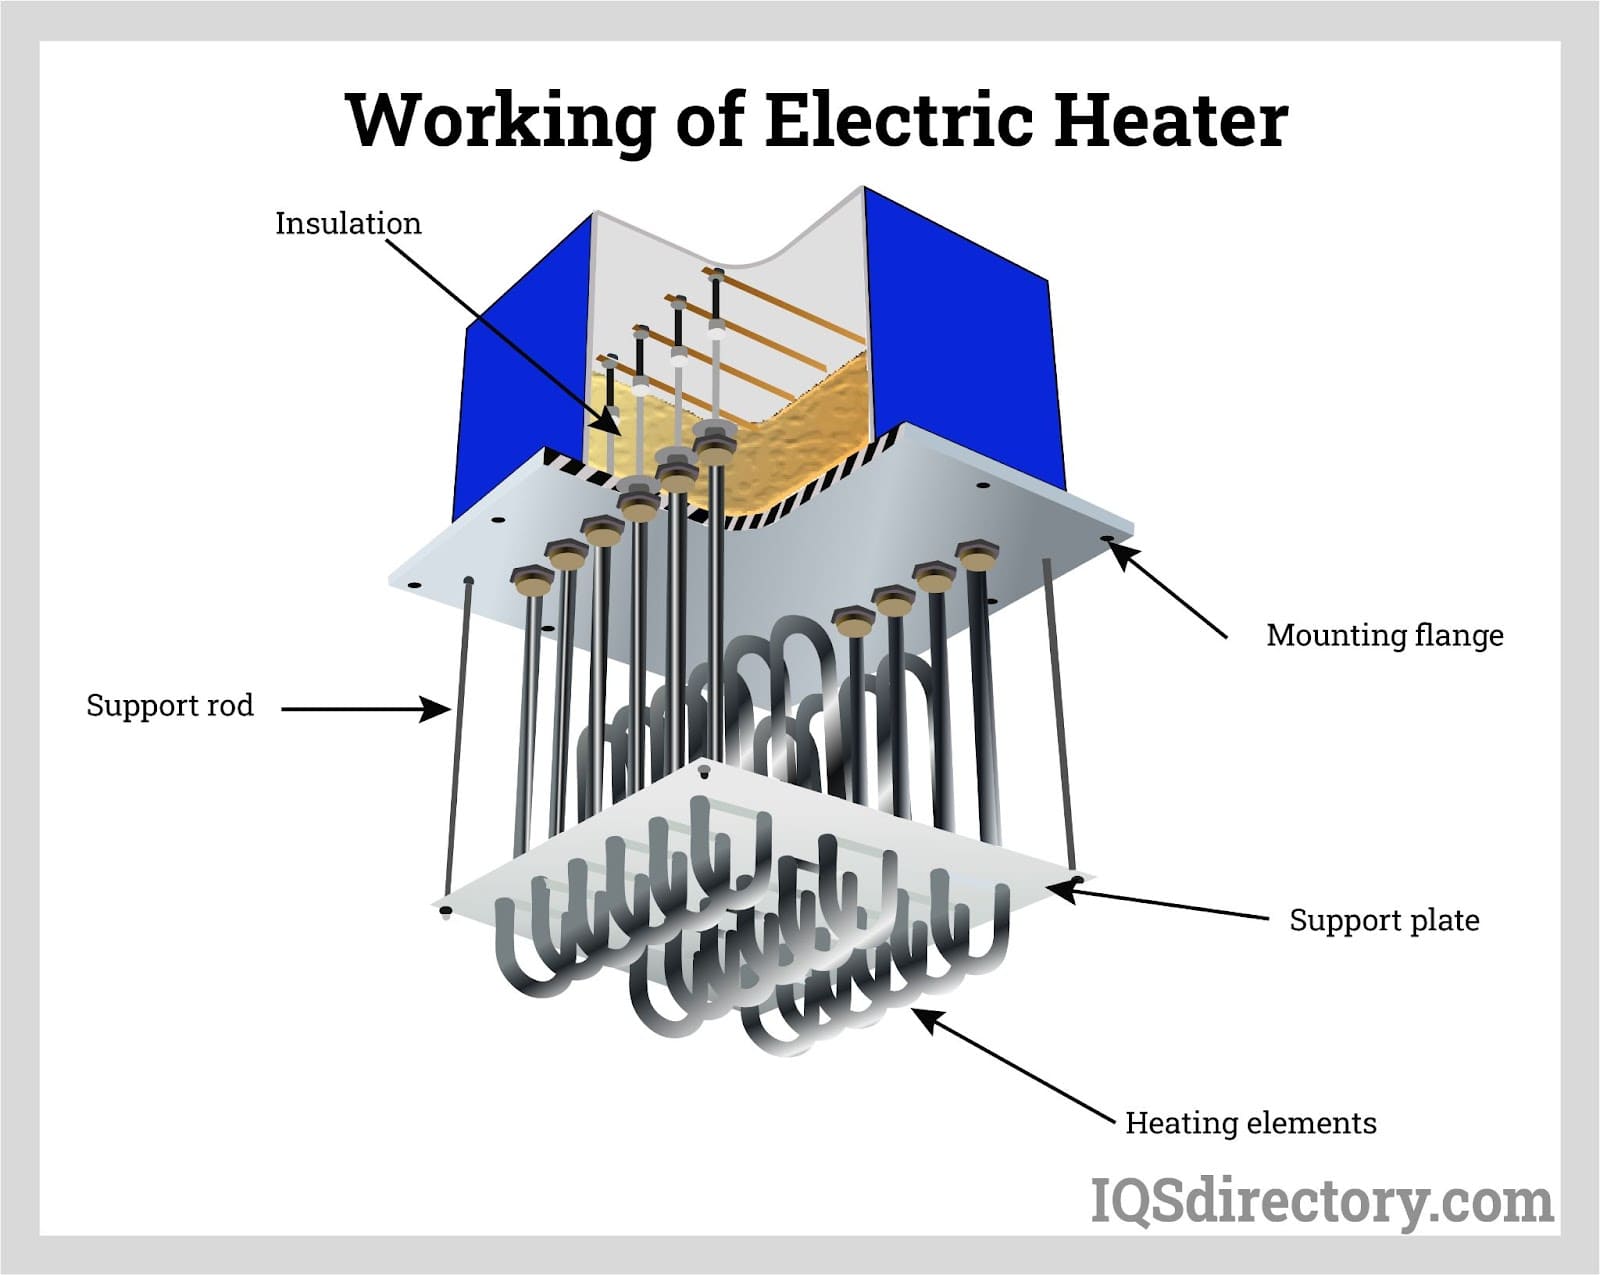 Working of Electric Heater